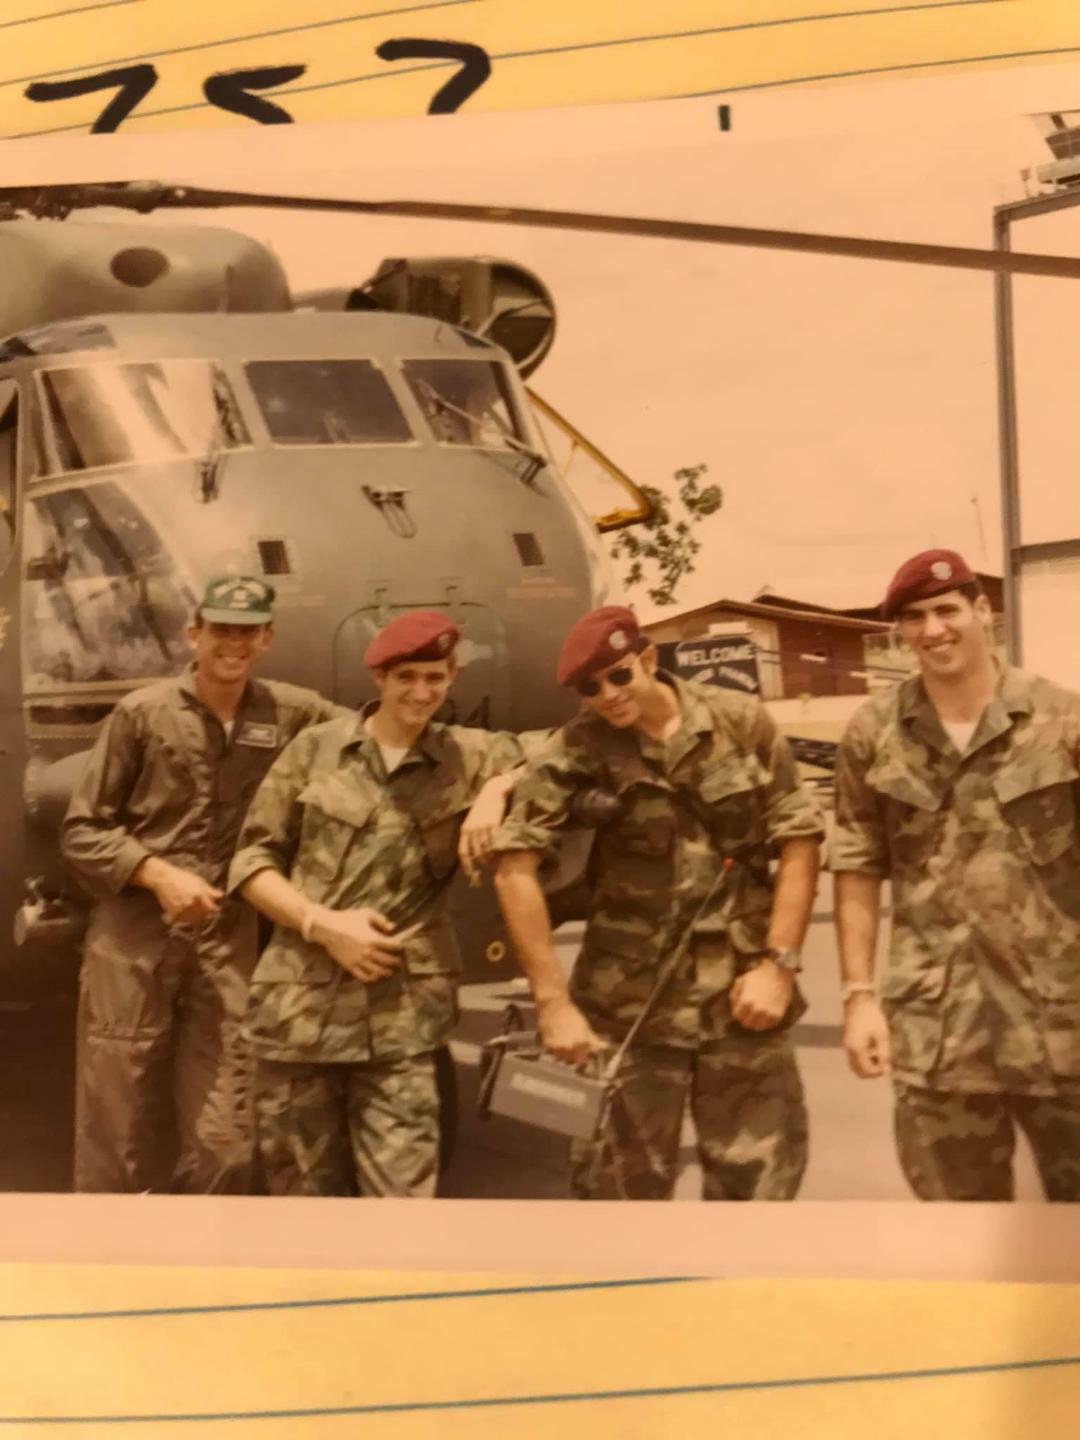 HH-53 Super Jolly Green rescue helicopter with pilot and three pararescuemen standing alert for their next mission during the Vietnam War.  William Hughes is at the far right.